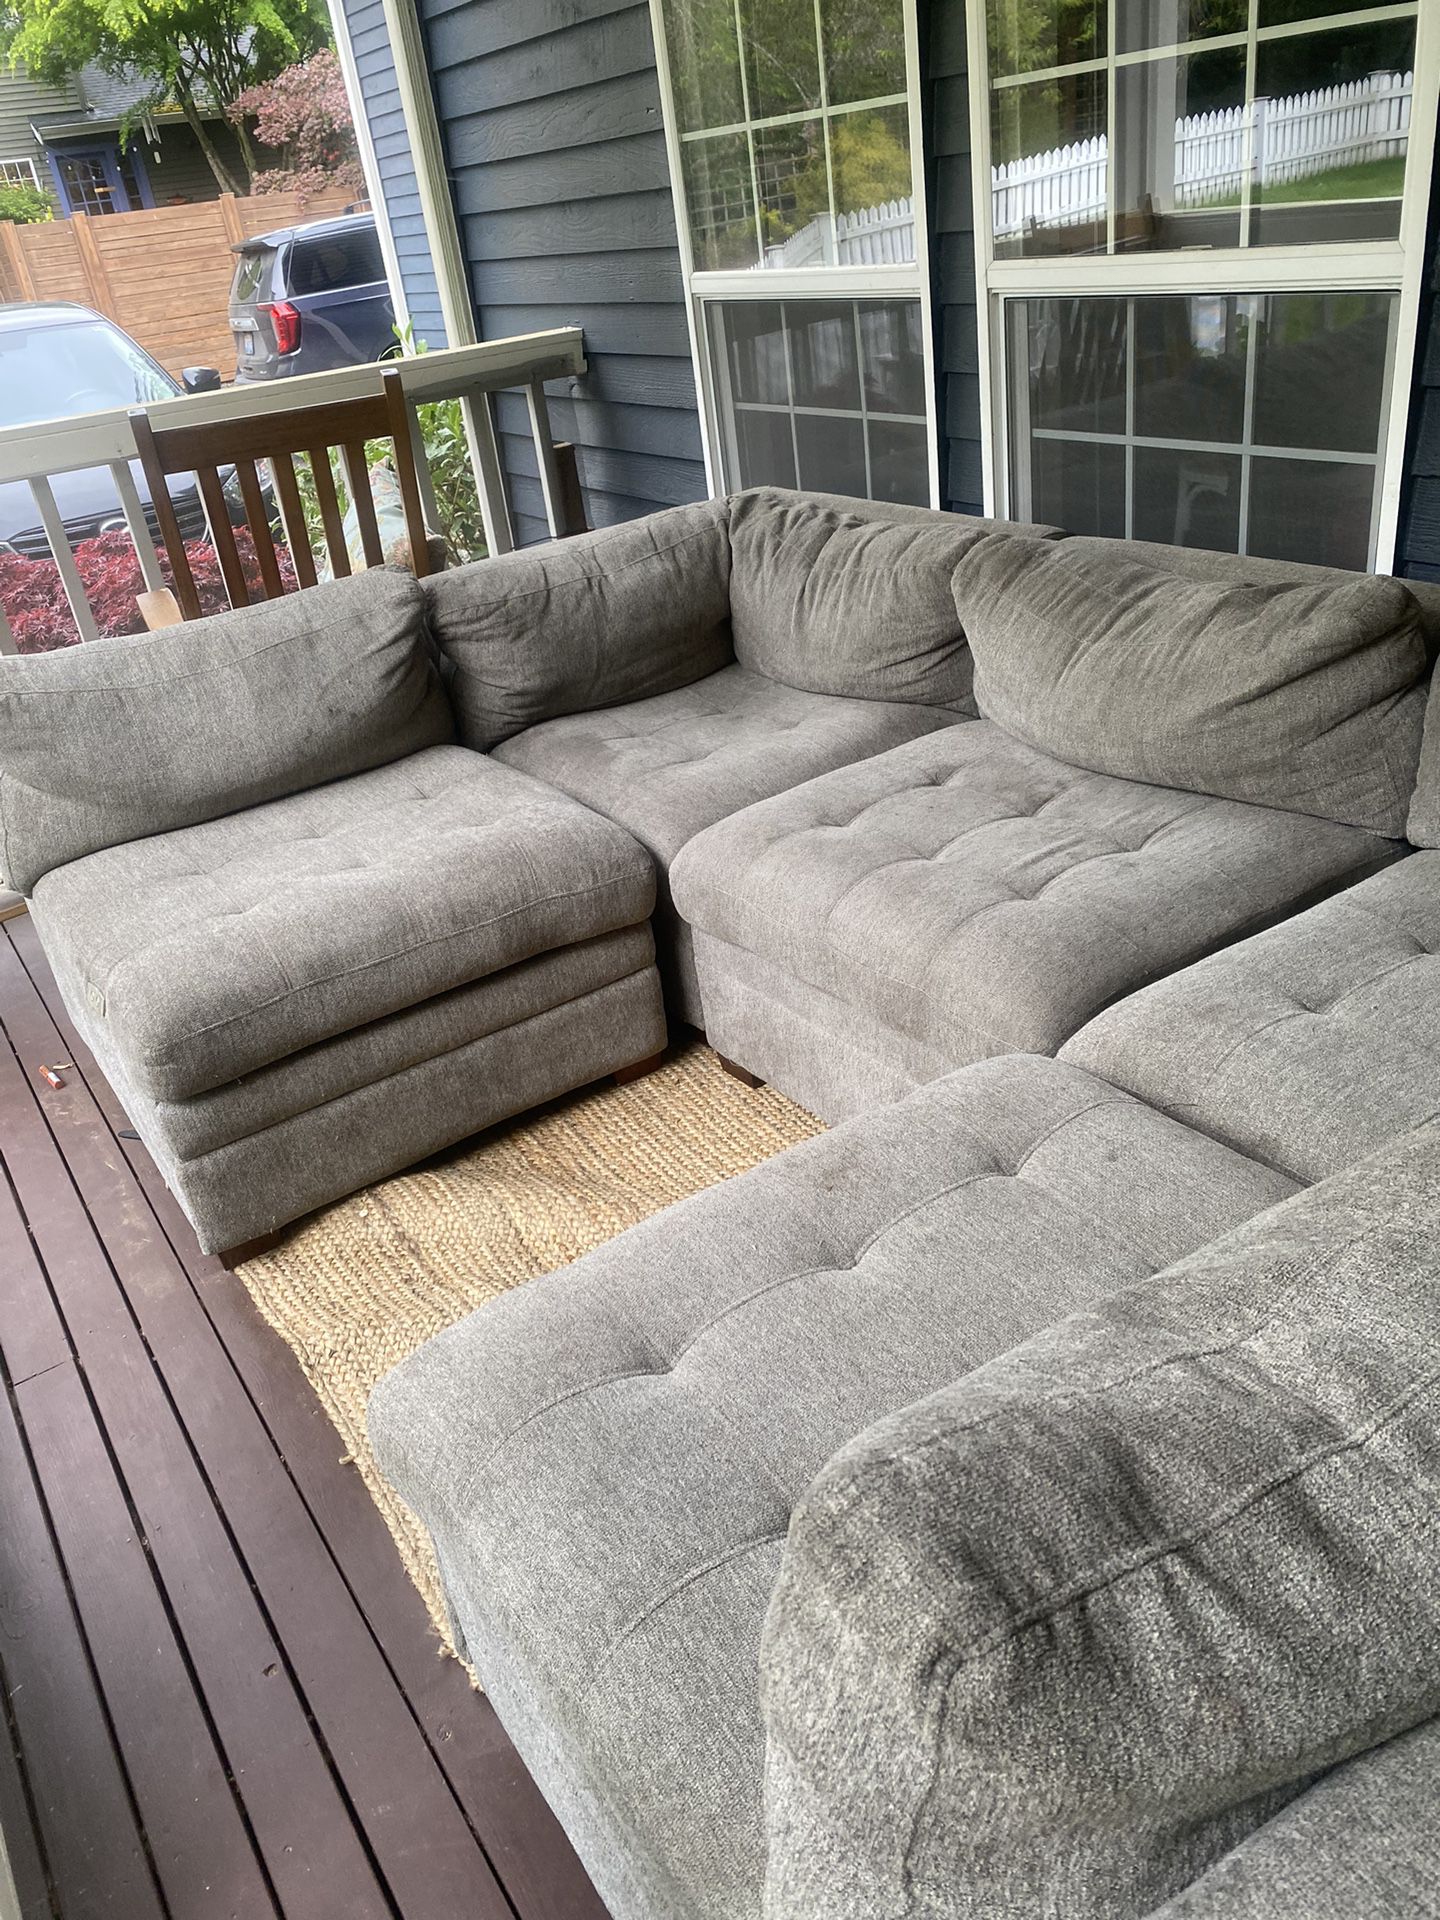 FREE 5- Piece Sectional Couch - Thomasville